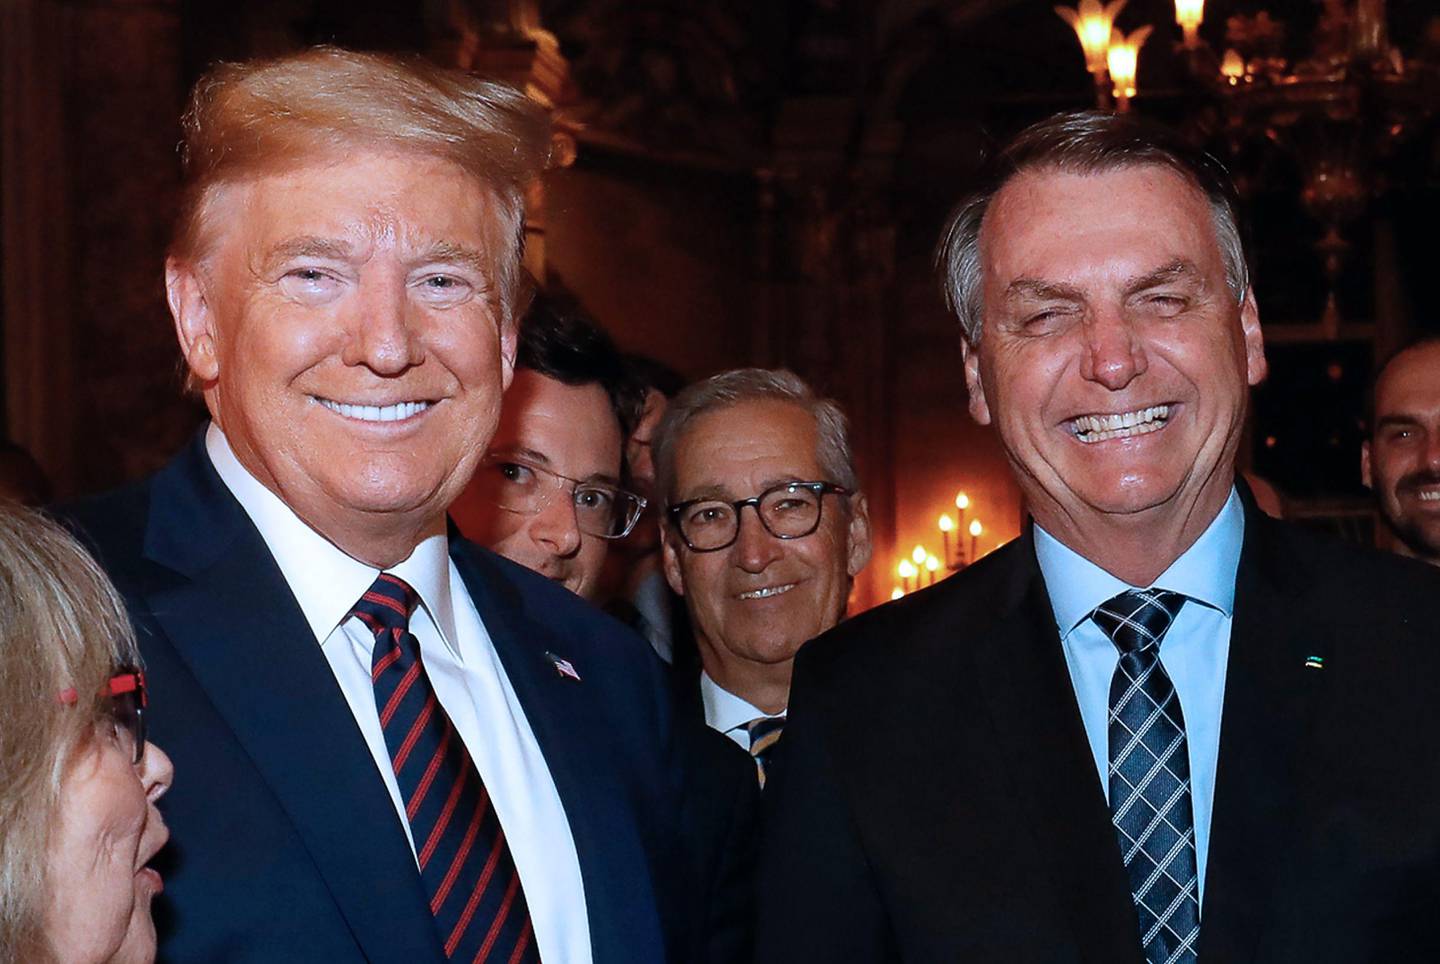 Handout picture released by the Brazilian Presidency on March 12, 2020 showing US President Donald Trump (L), Brazilian President Jair Bolsonaro (R) and his press advisor Fabio Wajngarten (2-L, behind Trump) during a dinner in Mar a Lago, Florida, United States, on March 7, 2020. - Brazilian President Jair Bolsonaro's communications chief, Fabio Wajngarten, who met US President Donald Trump last weekend at his Florida resort, has tested positive for the new coronavirus, the government said on March 12, 2020. Wajngarten, chief spokesman for the Brazilian government, travelled with Bolsonaro last Saturday to Tuesday to the United States. (Photo by Alan SANTOS / BRAZILIAN PRESIDENCY / AFP) / RESTRICTED TO EDITORIAL USE - MANDATORY CREDIT "AFP PHOTO / BRAZIL'S PRESIDENCY / ALAN SANTOS" - NO MARKETING - NO ADVERTISING CAMPAIGNS - DISTRIBUTED AS A SERVICE TO CLIENTS